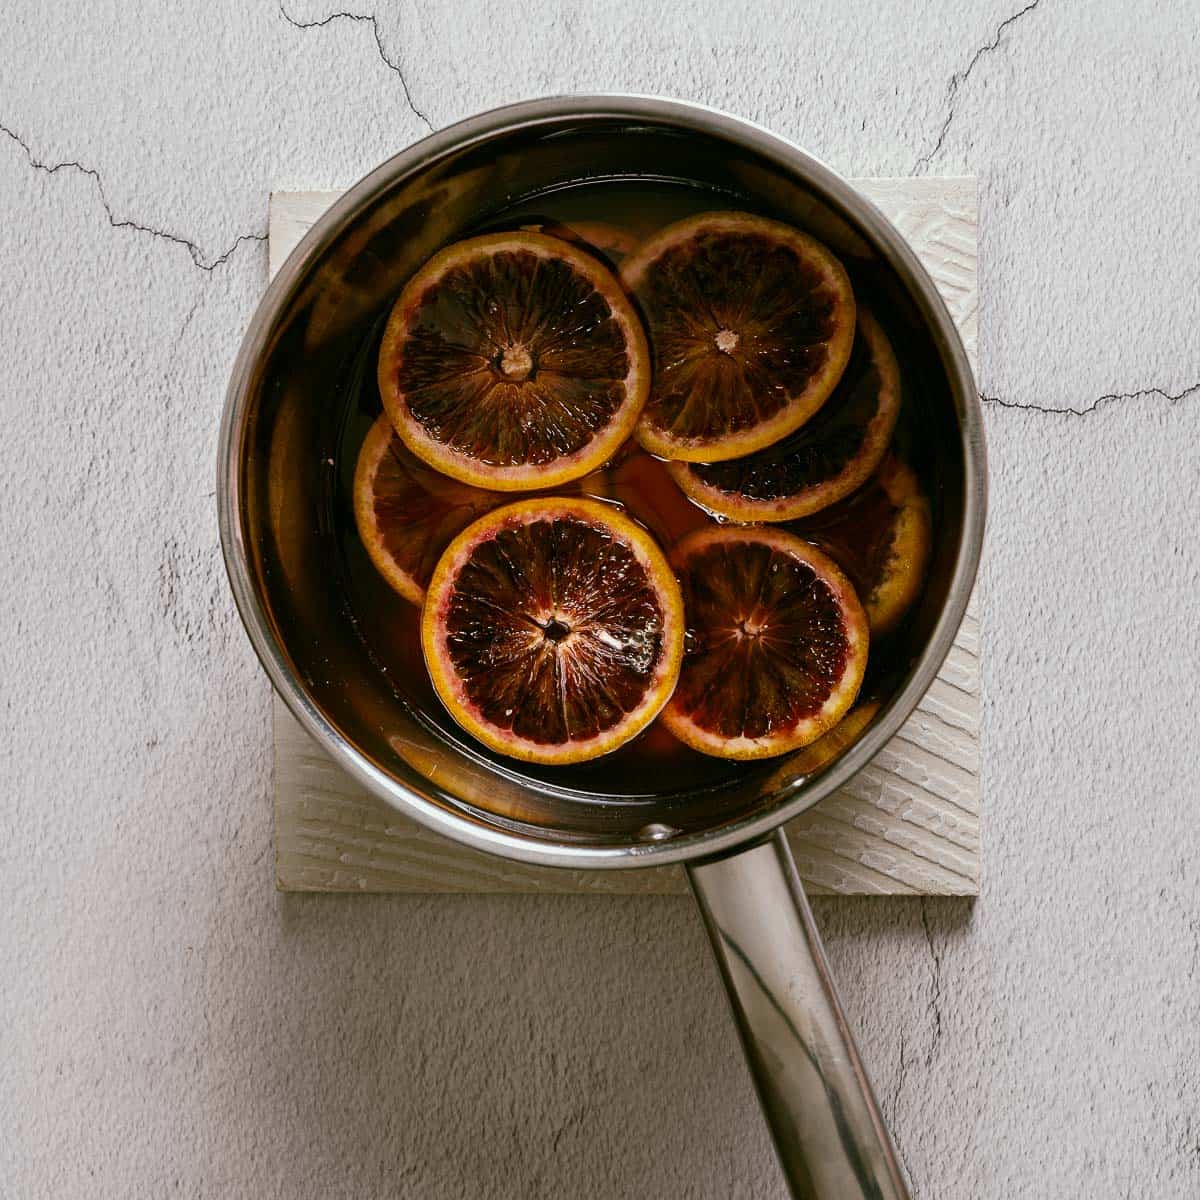 cooked blood orange slices on in a saucepan.